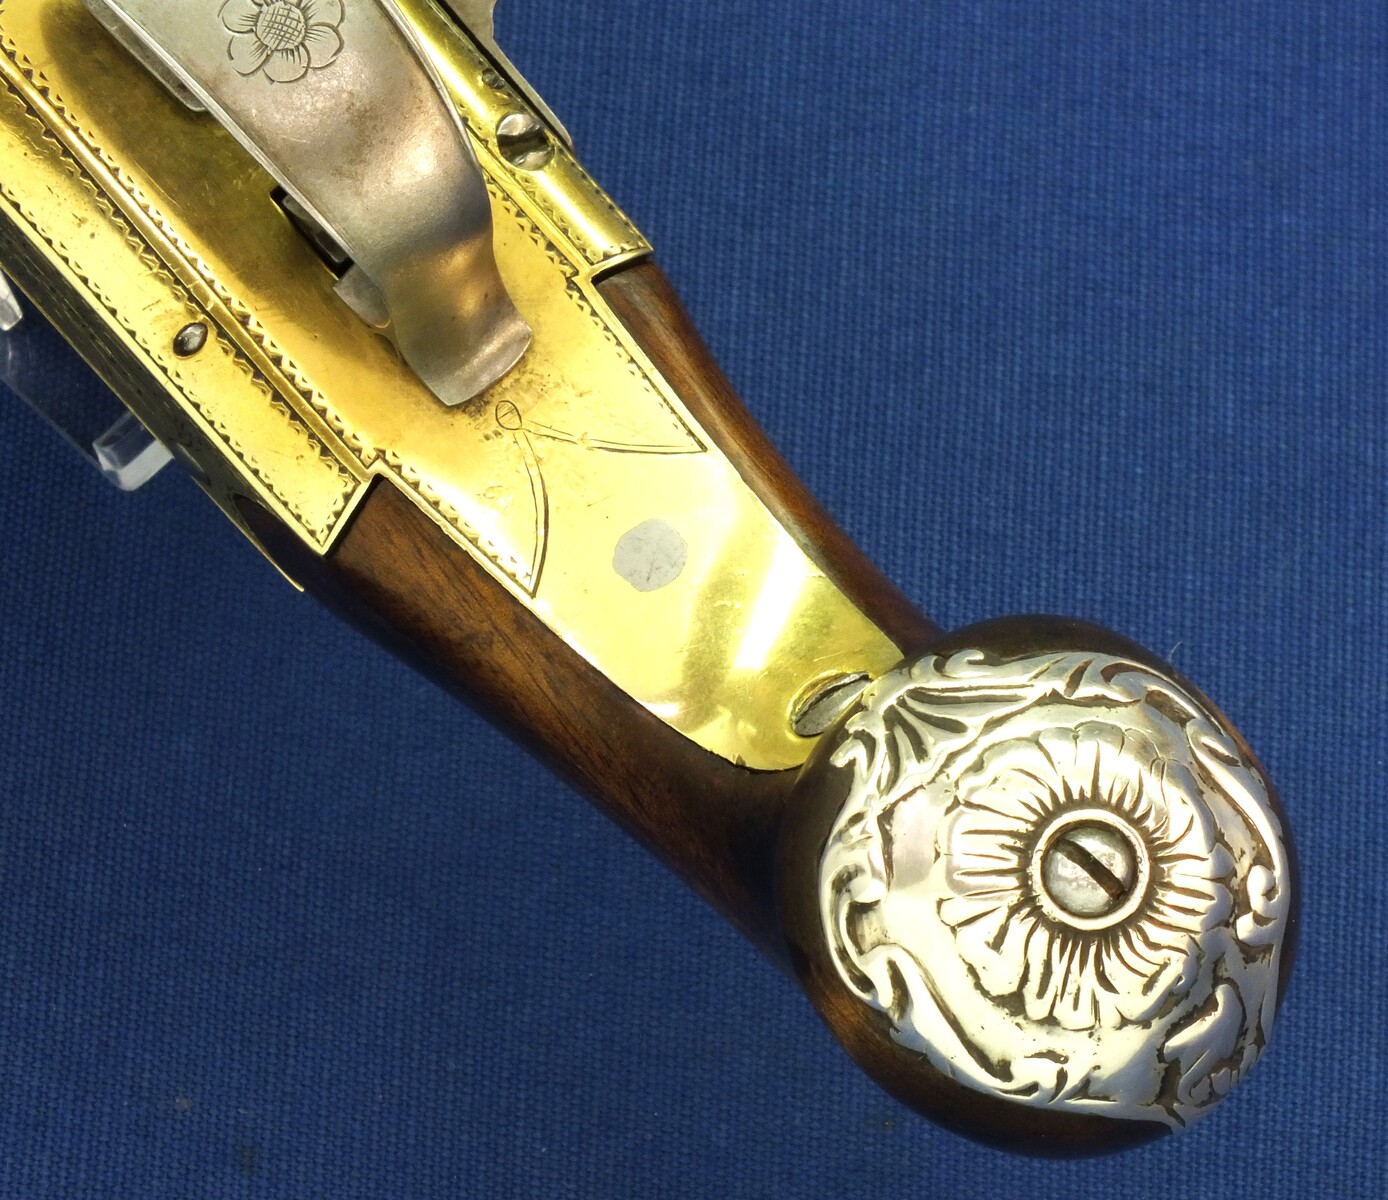 An antique English 18th Century circa 1775 Brass Box-Lock double barreled Flintlock pistol with sliding cut-off lever and trigger-guard safety catch. Signed KING LONDON. Caliber 13mm. Length 29,5cm. In very good condition. Price 1.850 euro.